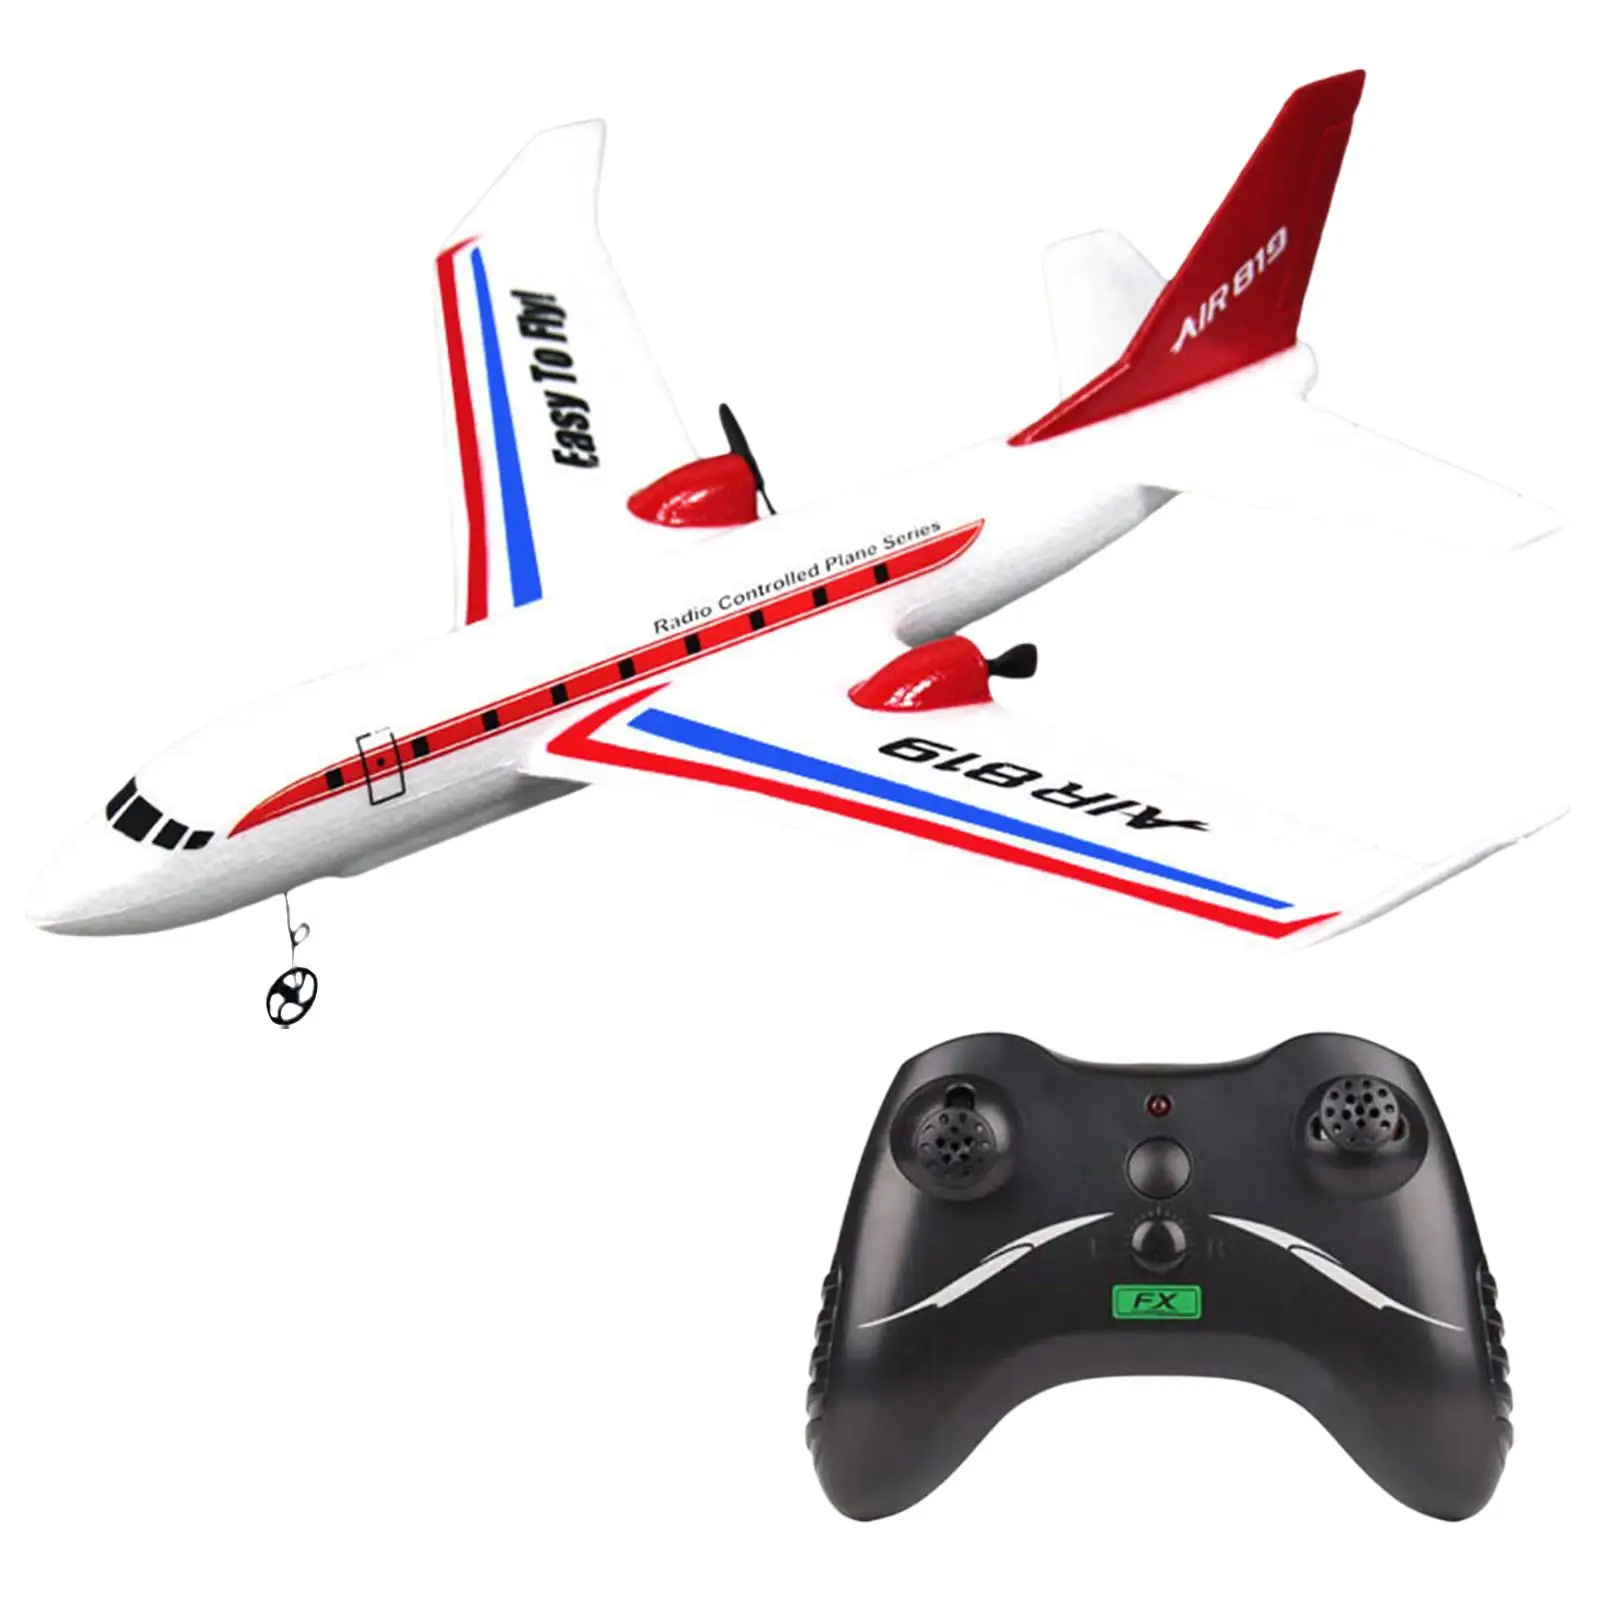 DIY RC Plane Toy Gliding Aircraft Model Toys, Ready to Fly,  Time:15-20 Minutes